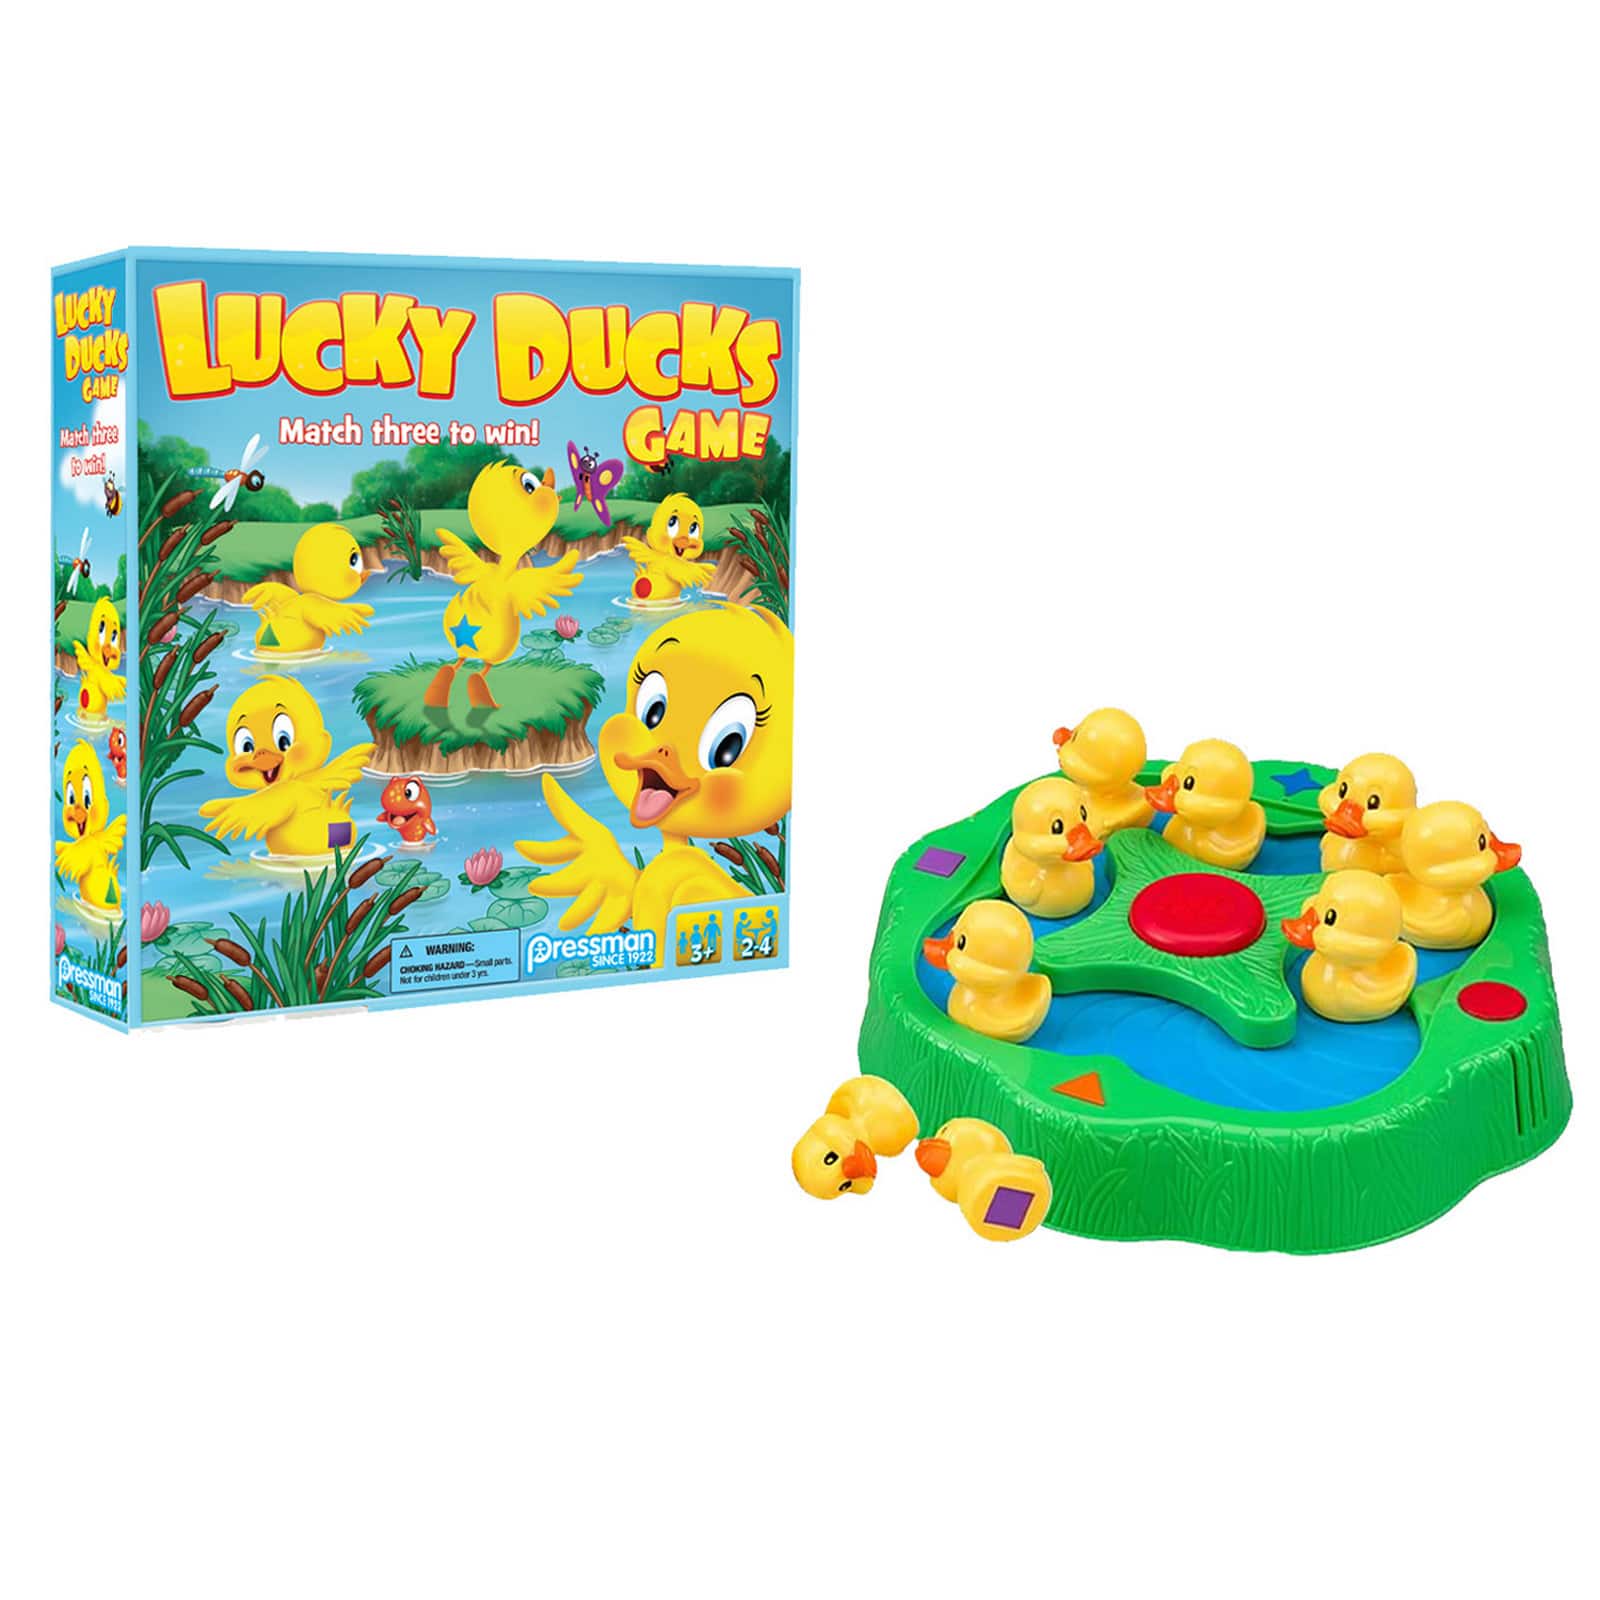   Exclusive Bonus Edition Let's Go Fishin' - Includes  Lucky Ducks Make-A-Match Game! : Toys & Games